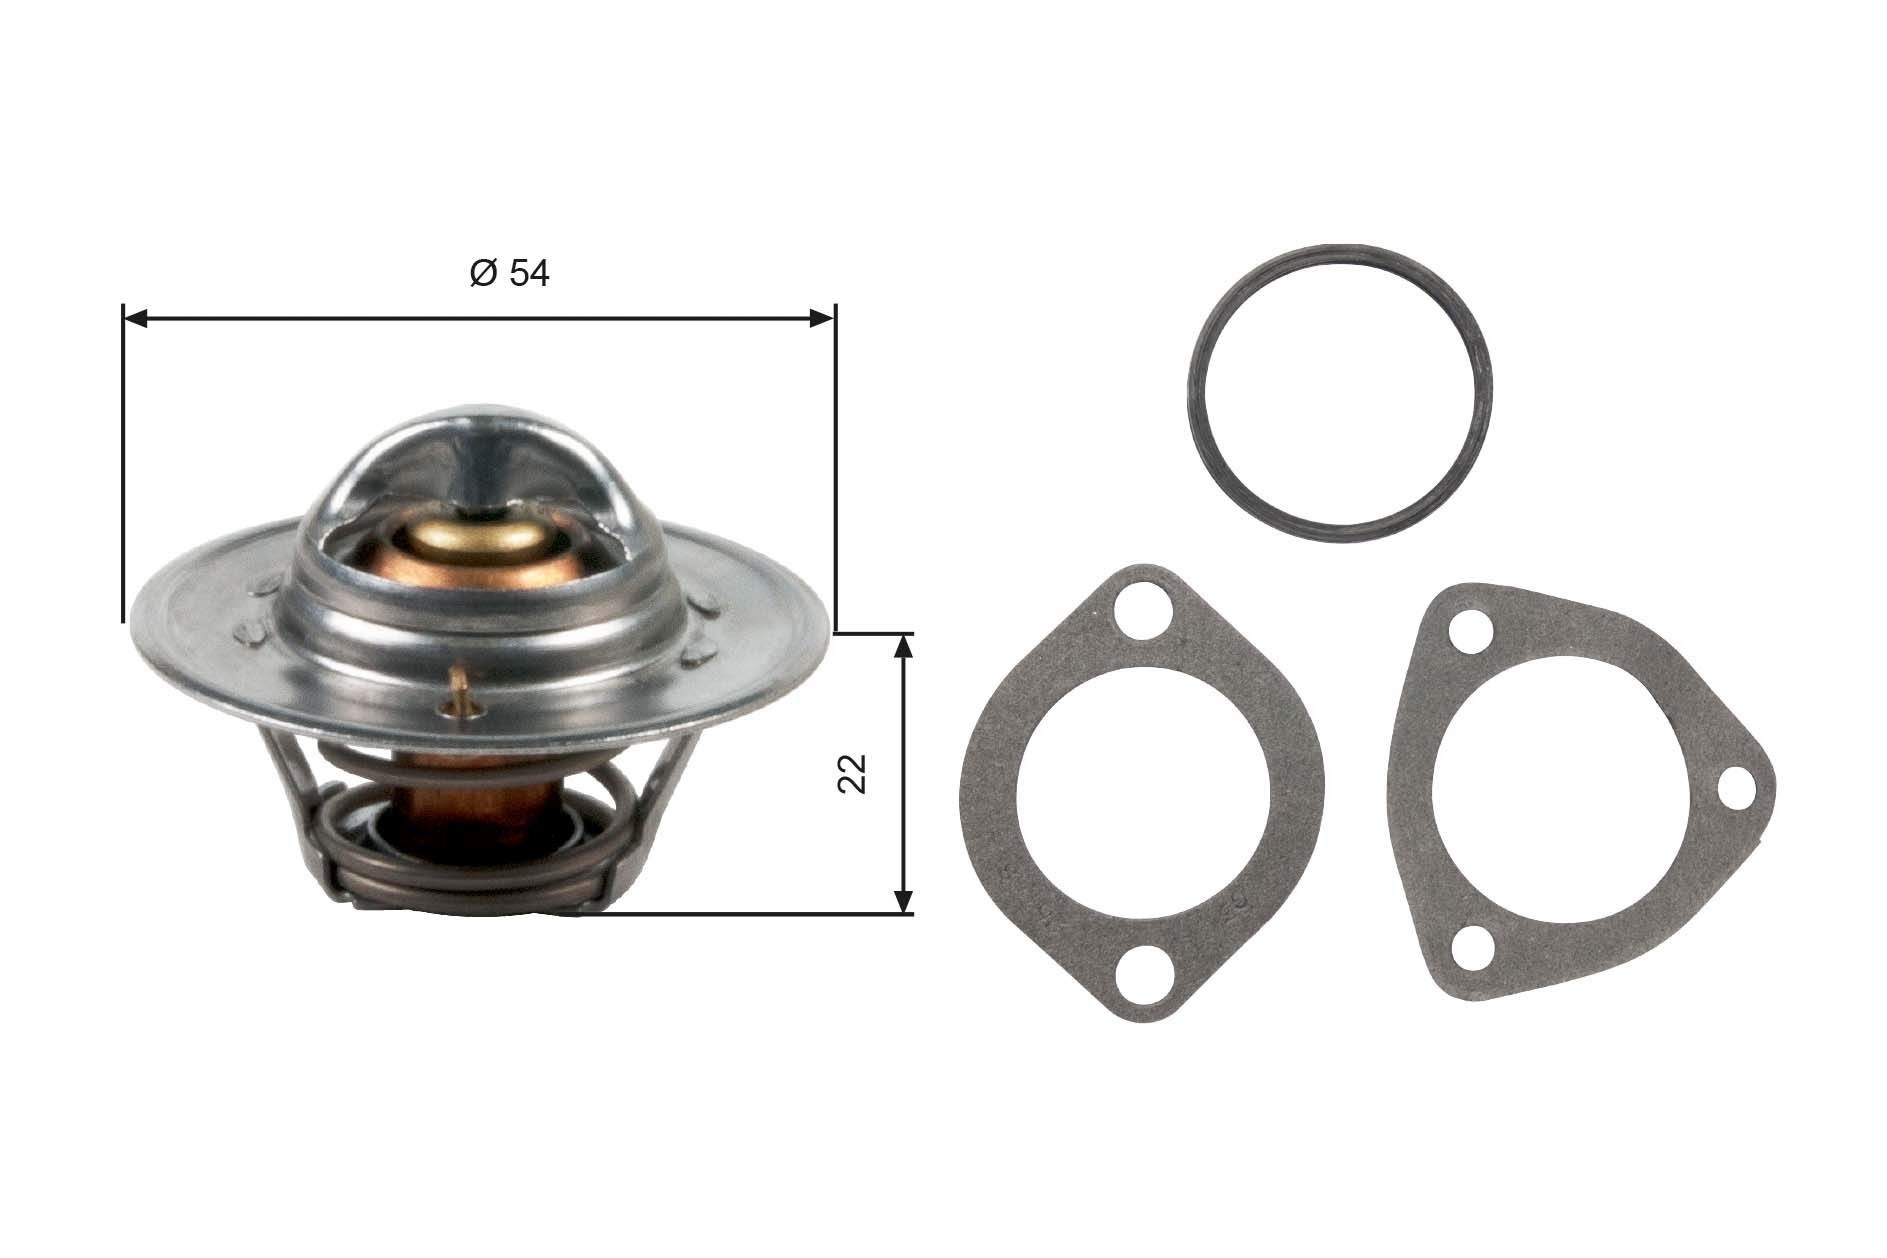 GATES TH12782G1 Engine thermostat Opening Temperature: 82°C, with gaskets/seals, without housing